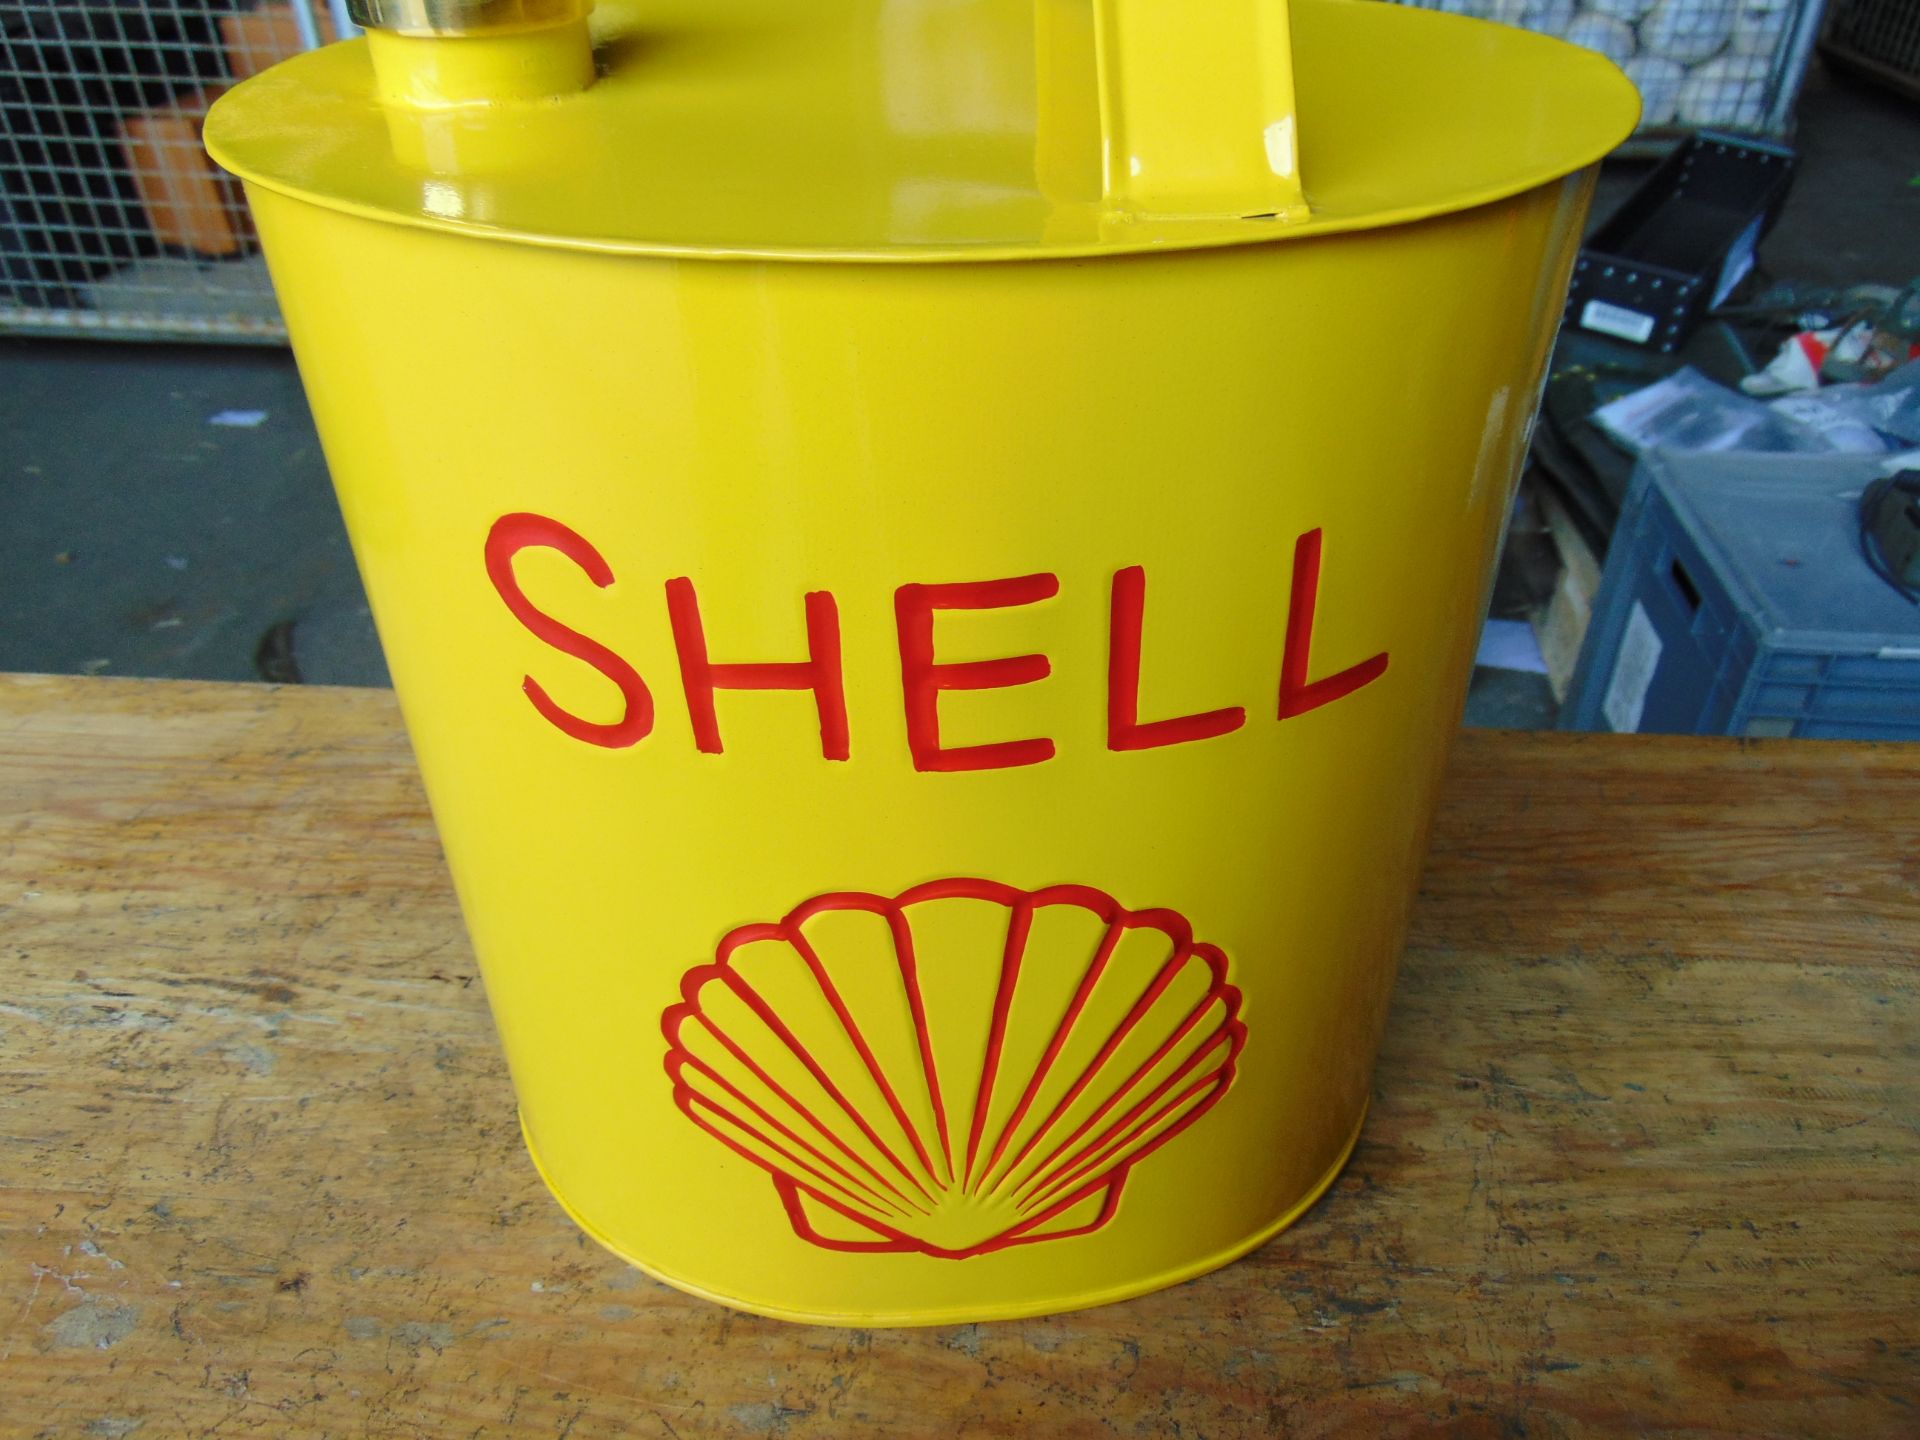 New Unused Large Shell 2 Gall Oval Fuel/Oil Can c/w Brass Cap - Image 2 of 6